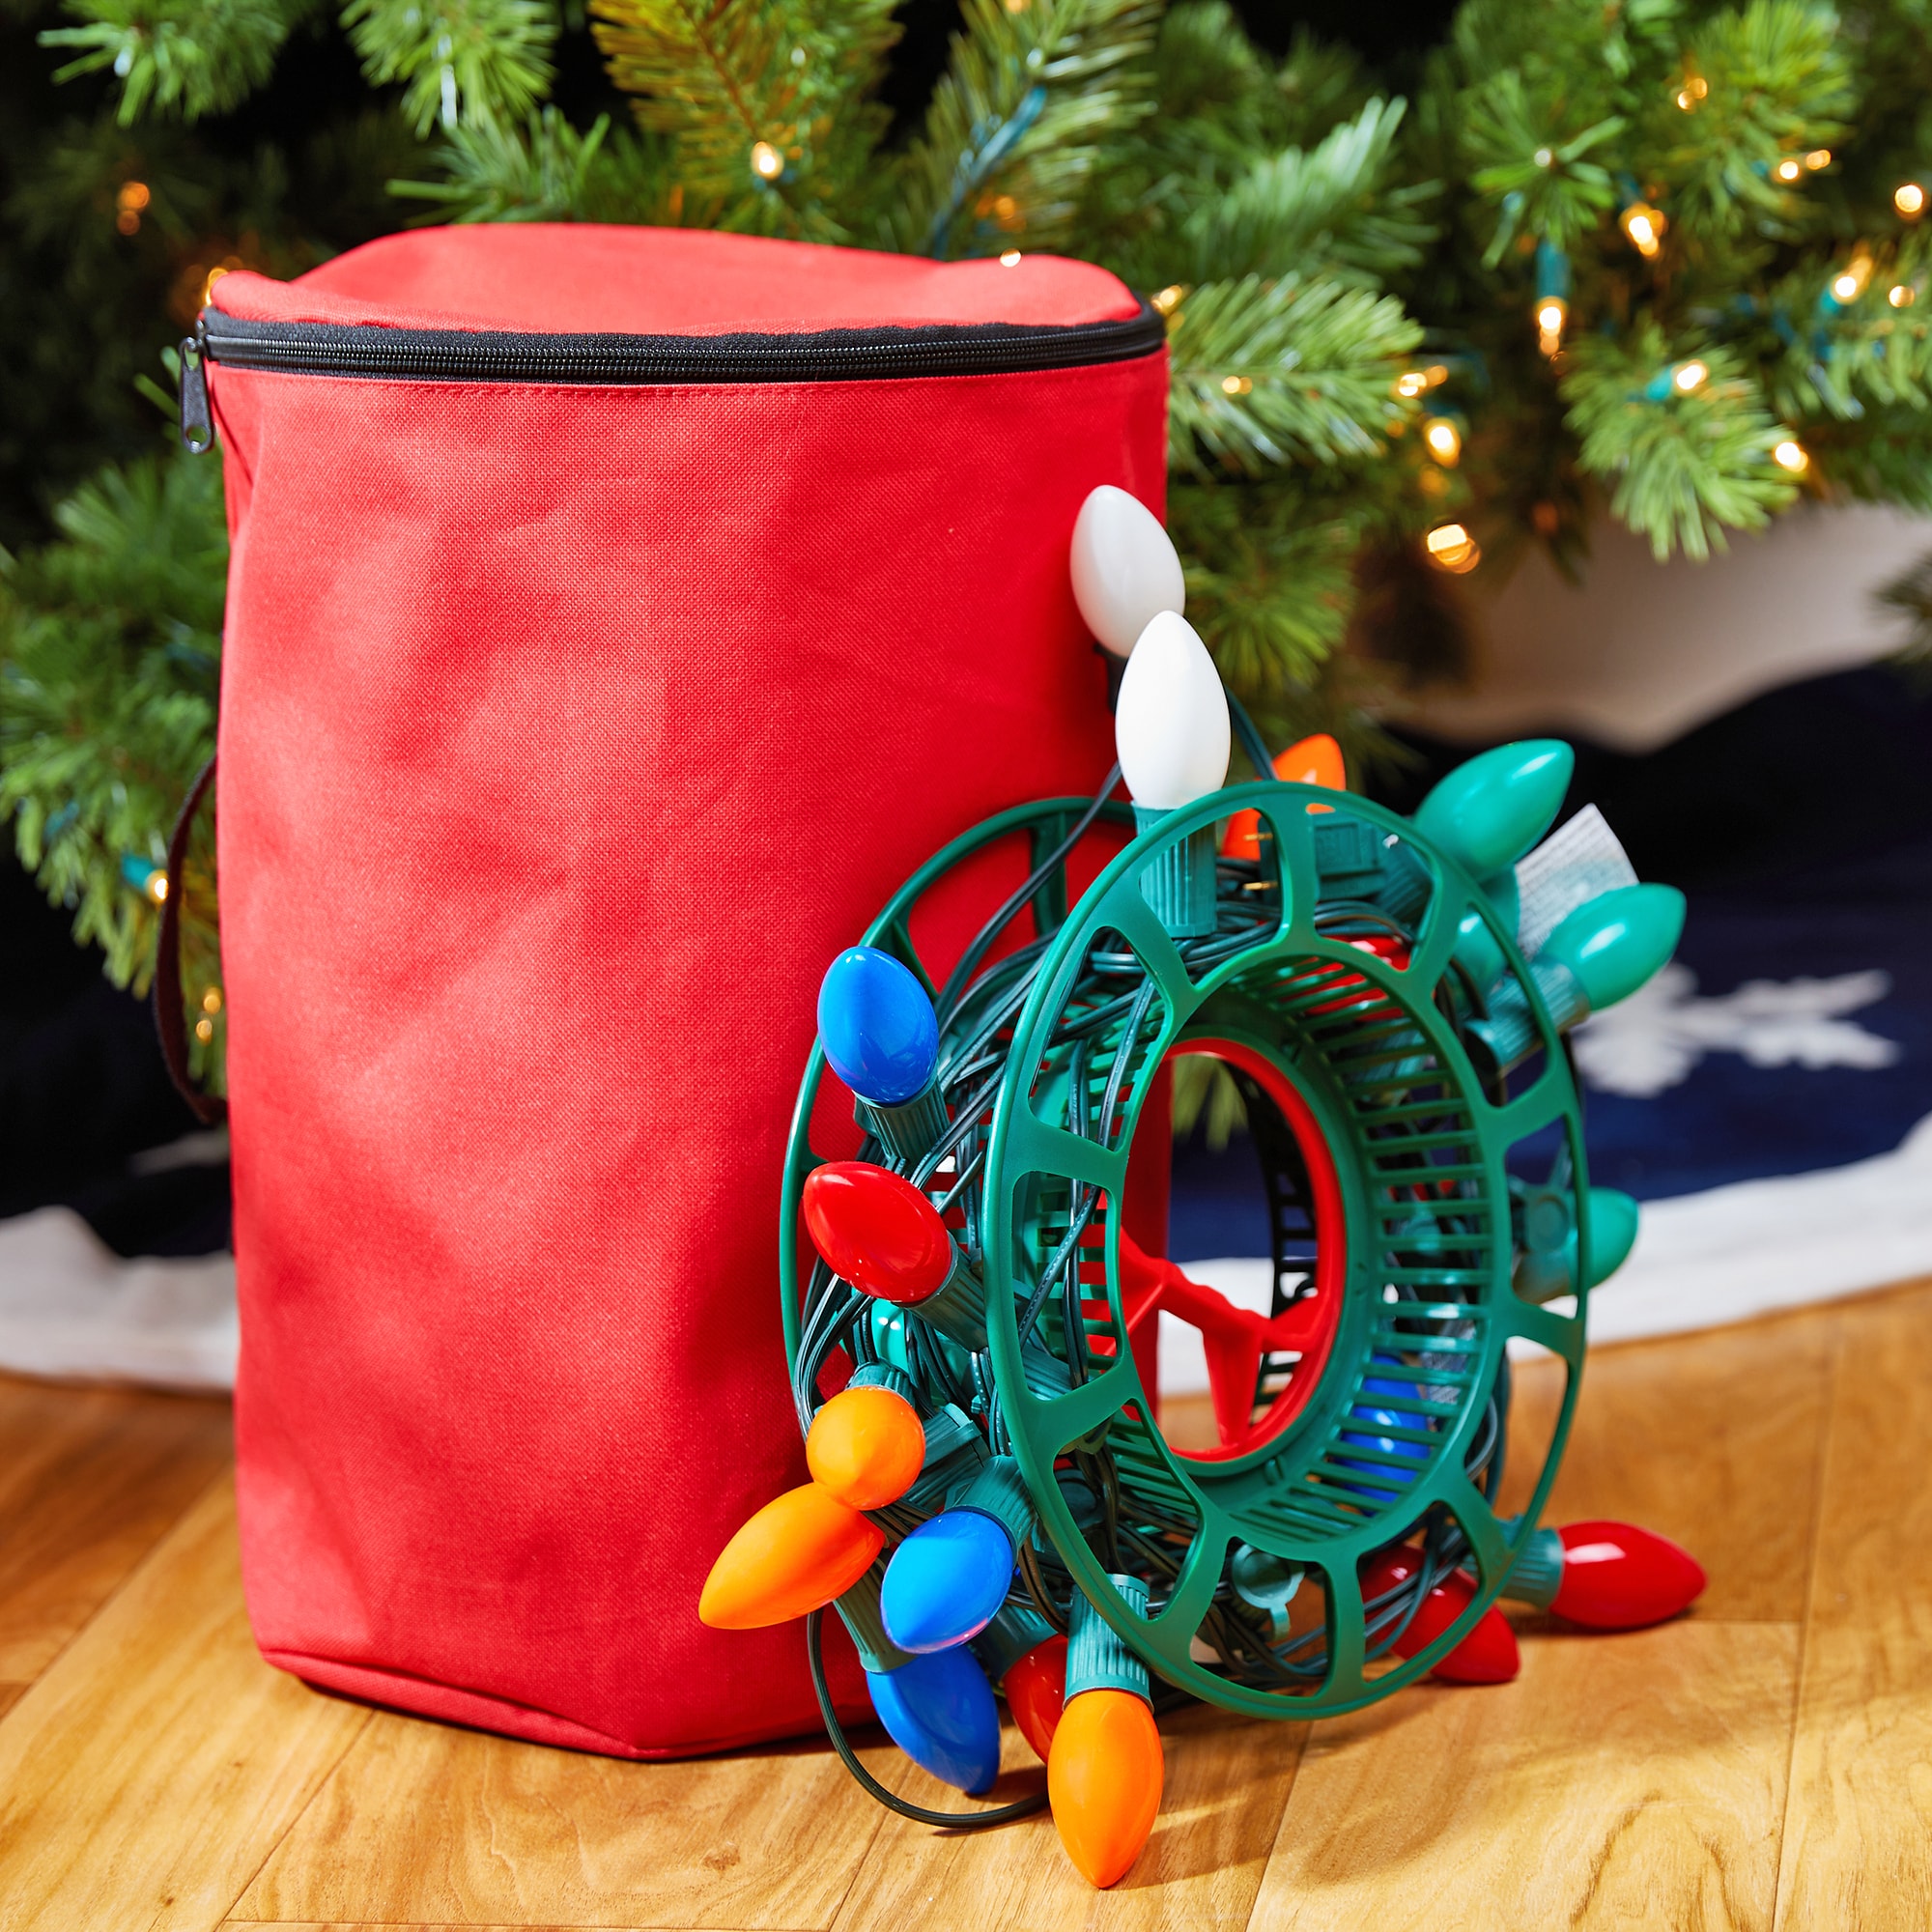 Christmas Light Storage Reels with Zip Up Bag